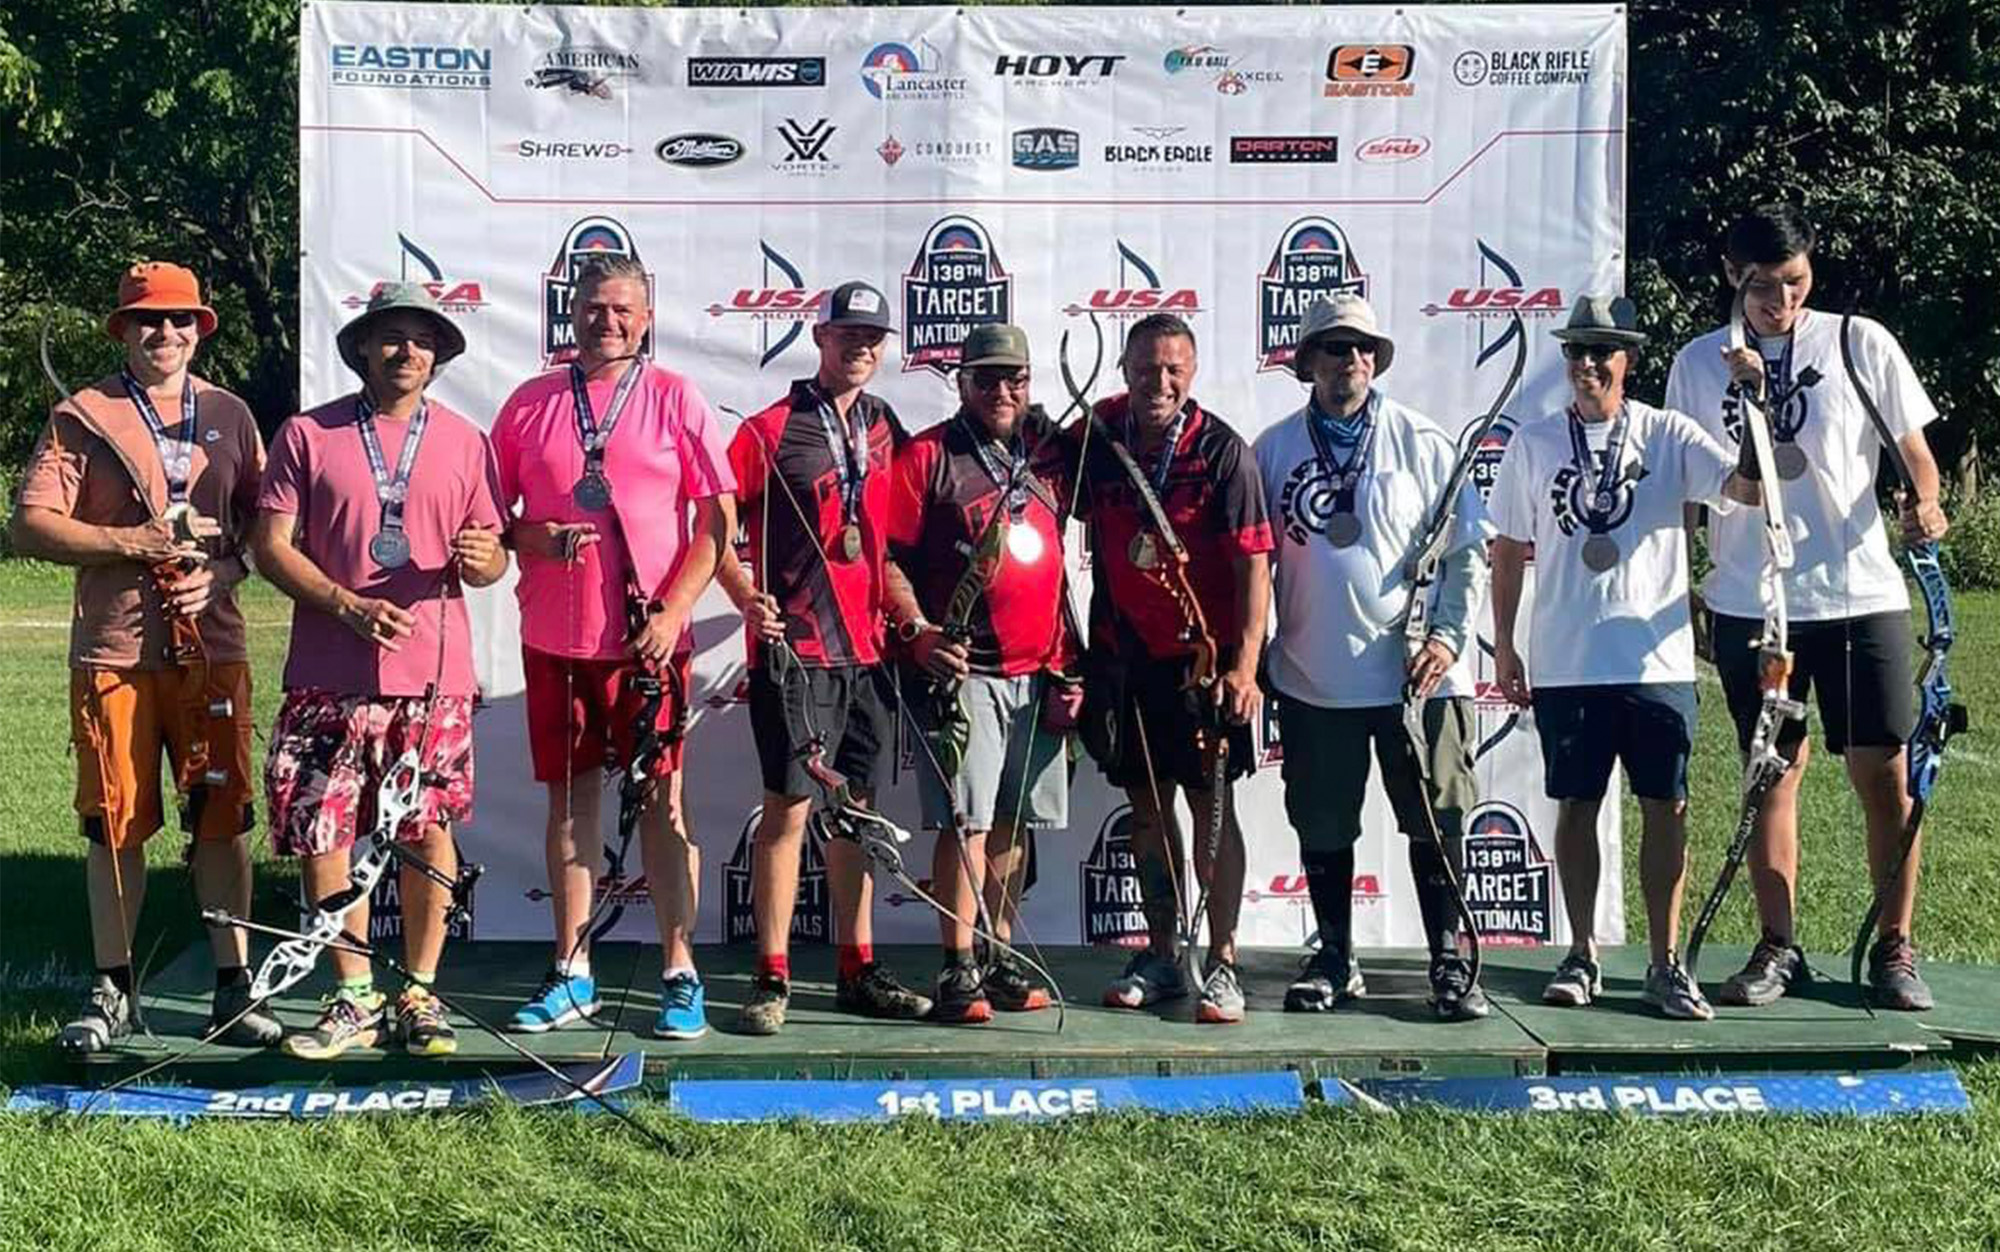 Scott won second place in an archery competition in the Altra Lone Peak trail runners.